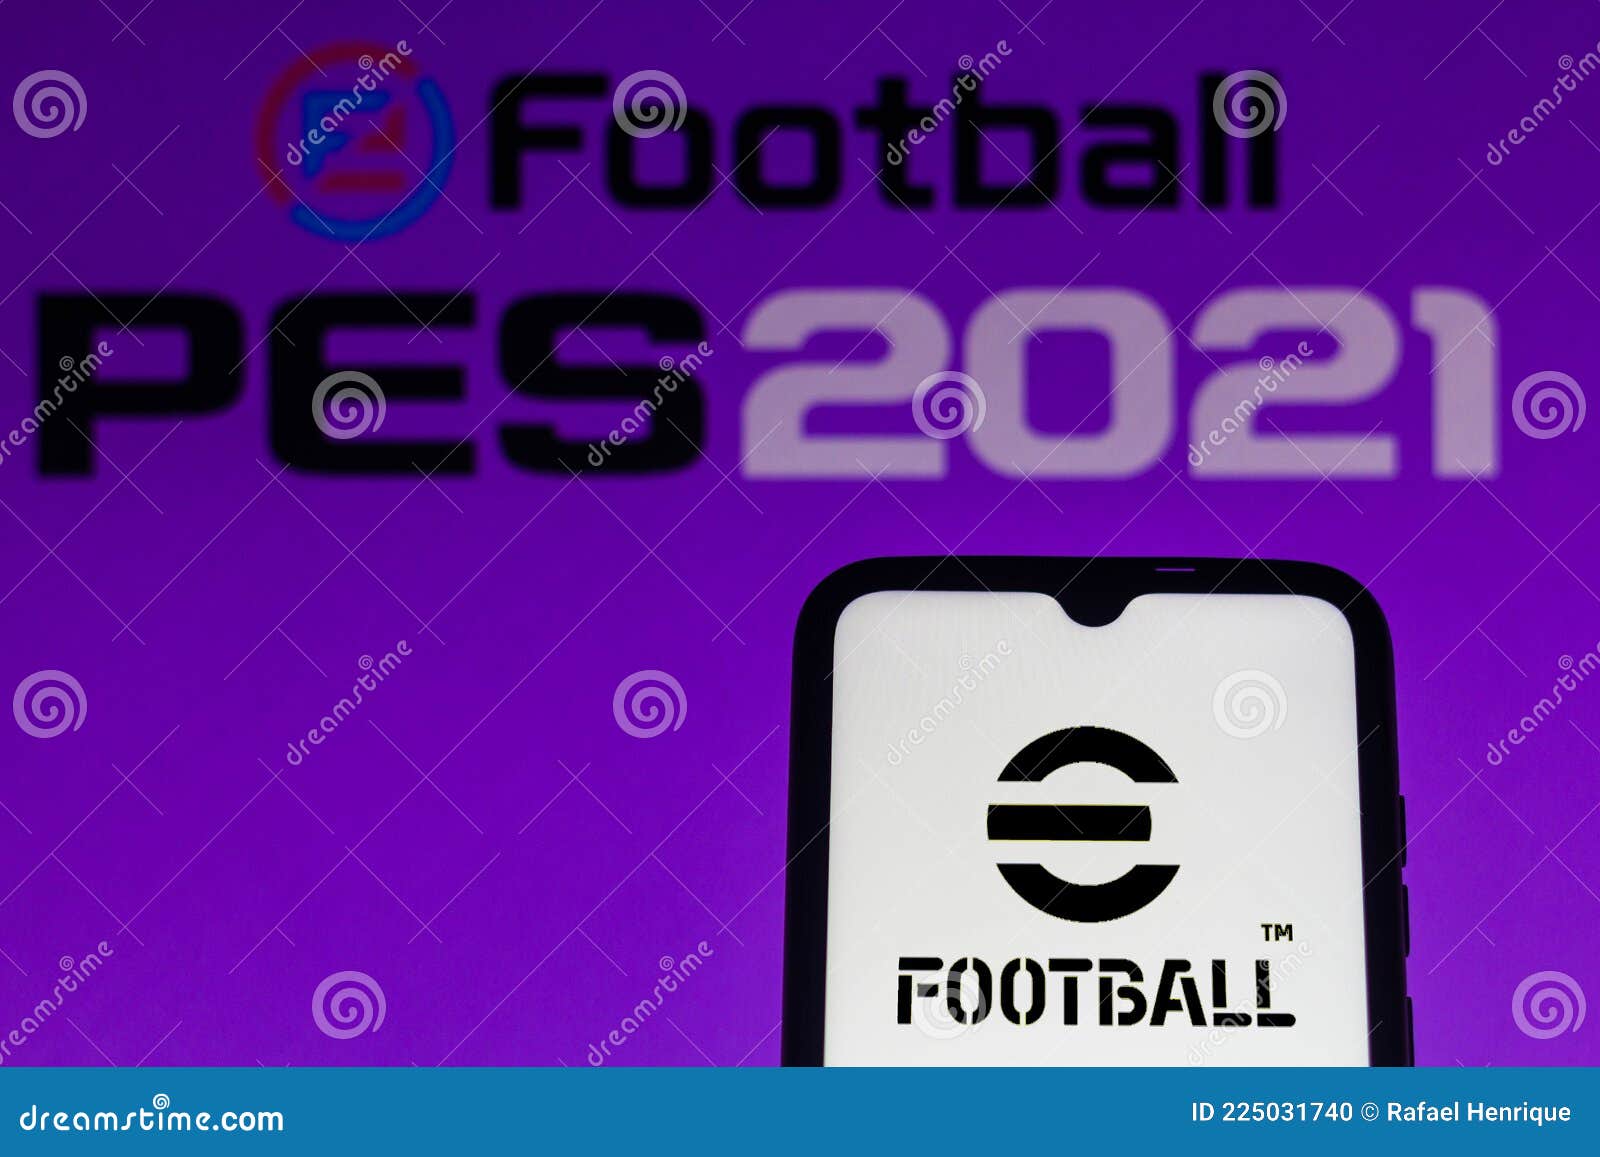 July 21 21 Brazil In This Photo Illustration The Efootball Logo Game Seen Displayed On A Smartphone Konami Reveals That Pro Editorial Image Image Of Online Marketing